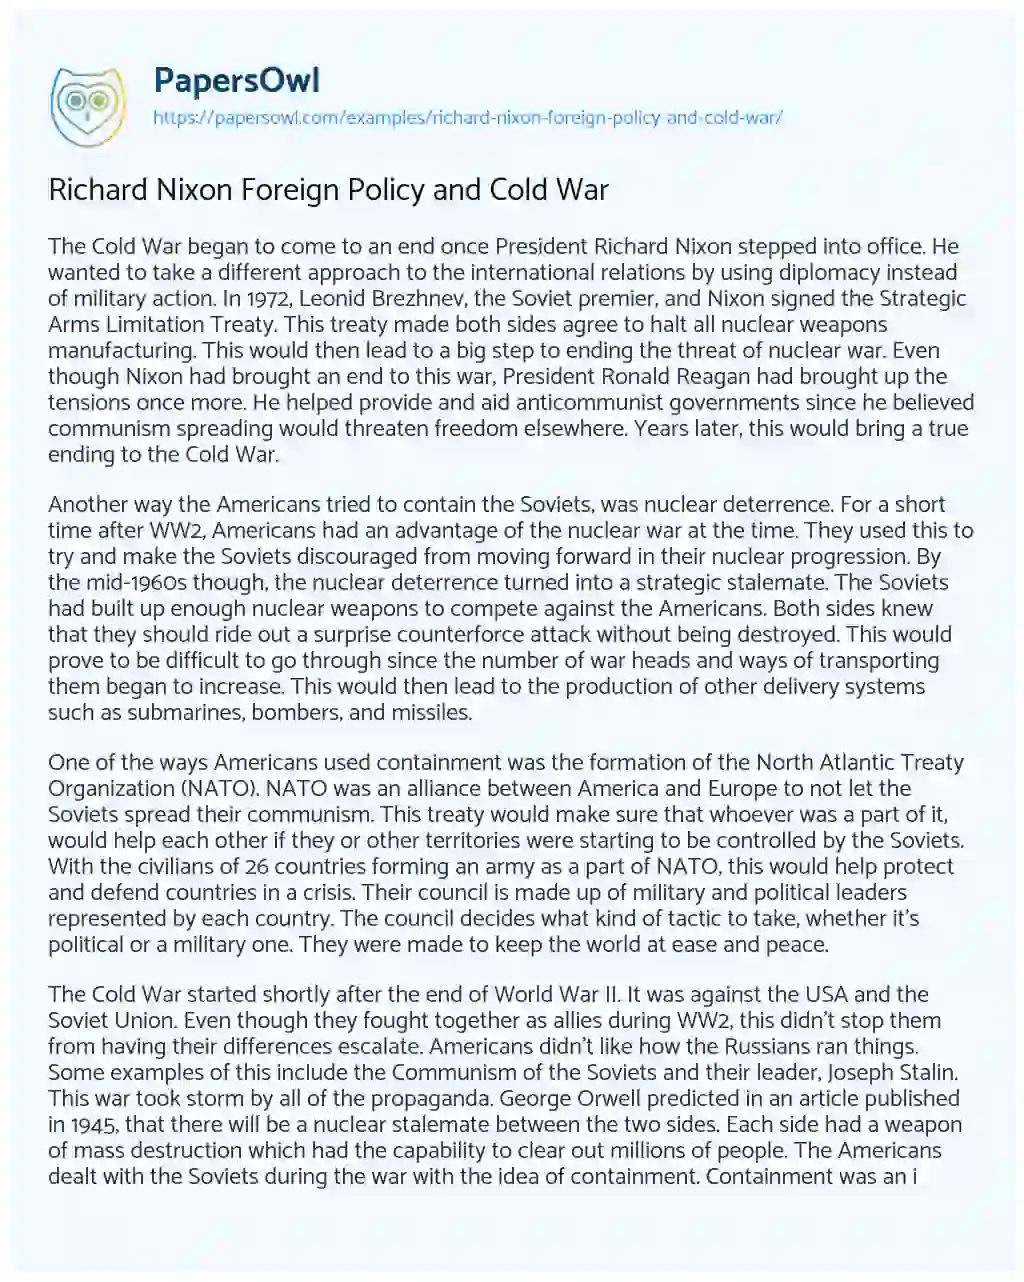 Richard Nixon Foreign Policy and Cold War essay